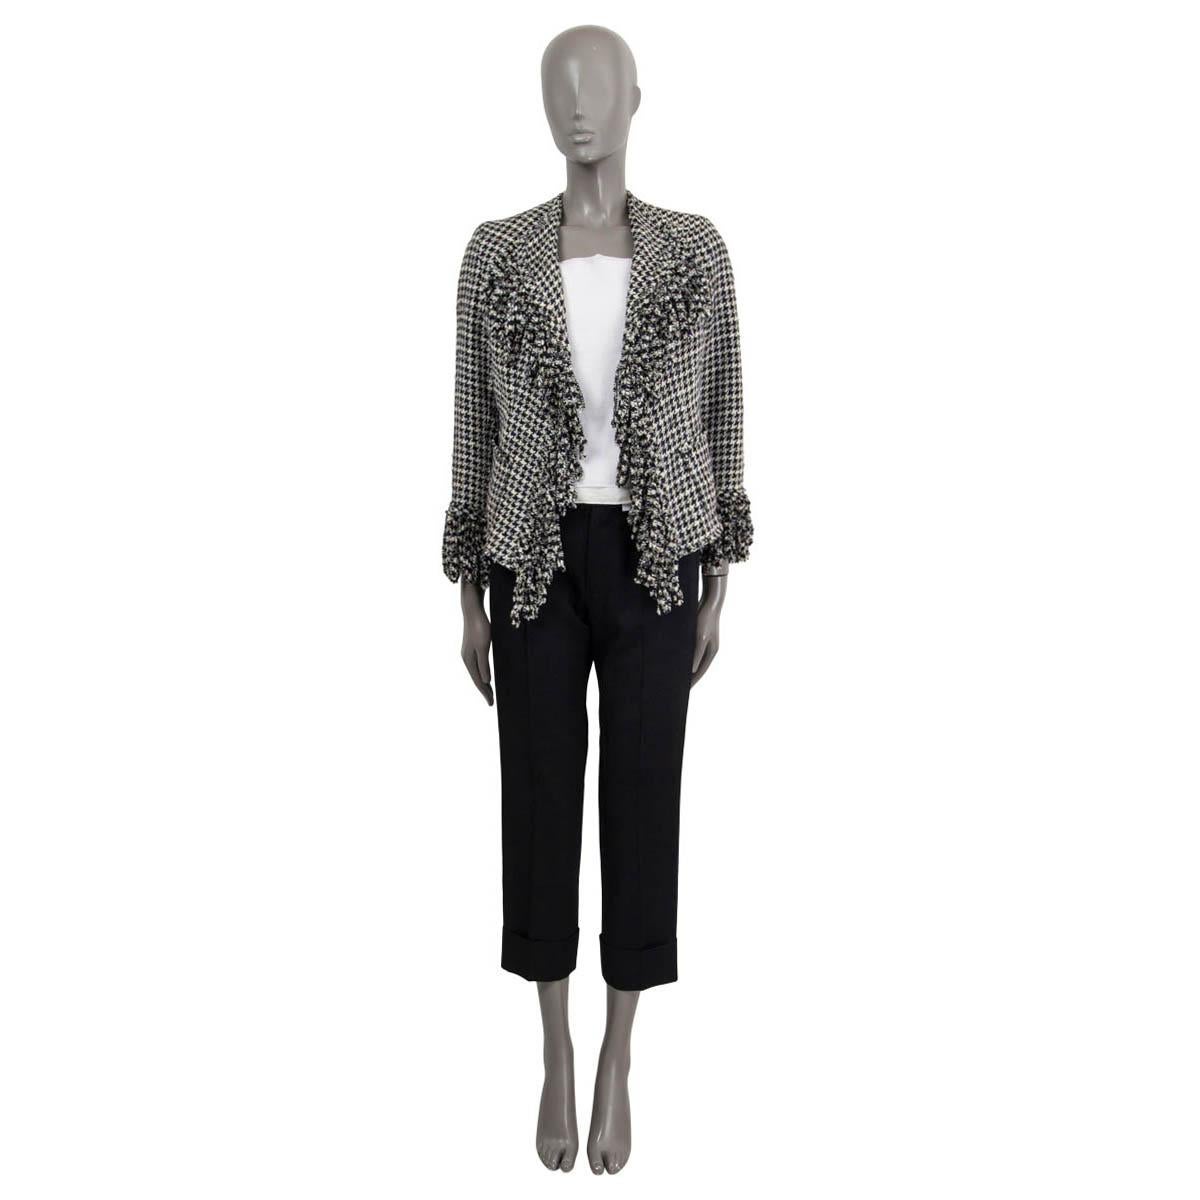 100% authentic Chanel 2007 open houndstooth tweed jacket in light off-white, grey, navy and black silk (50%), linen (35%) and wool (15%) featuring fringed edges and two patch pockets on the front. Lined in black black silk (98%) and elastane (2%).